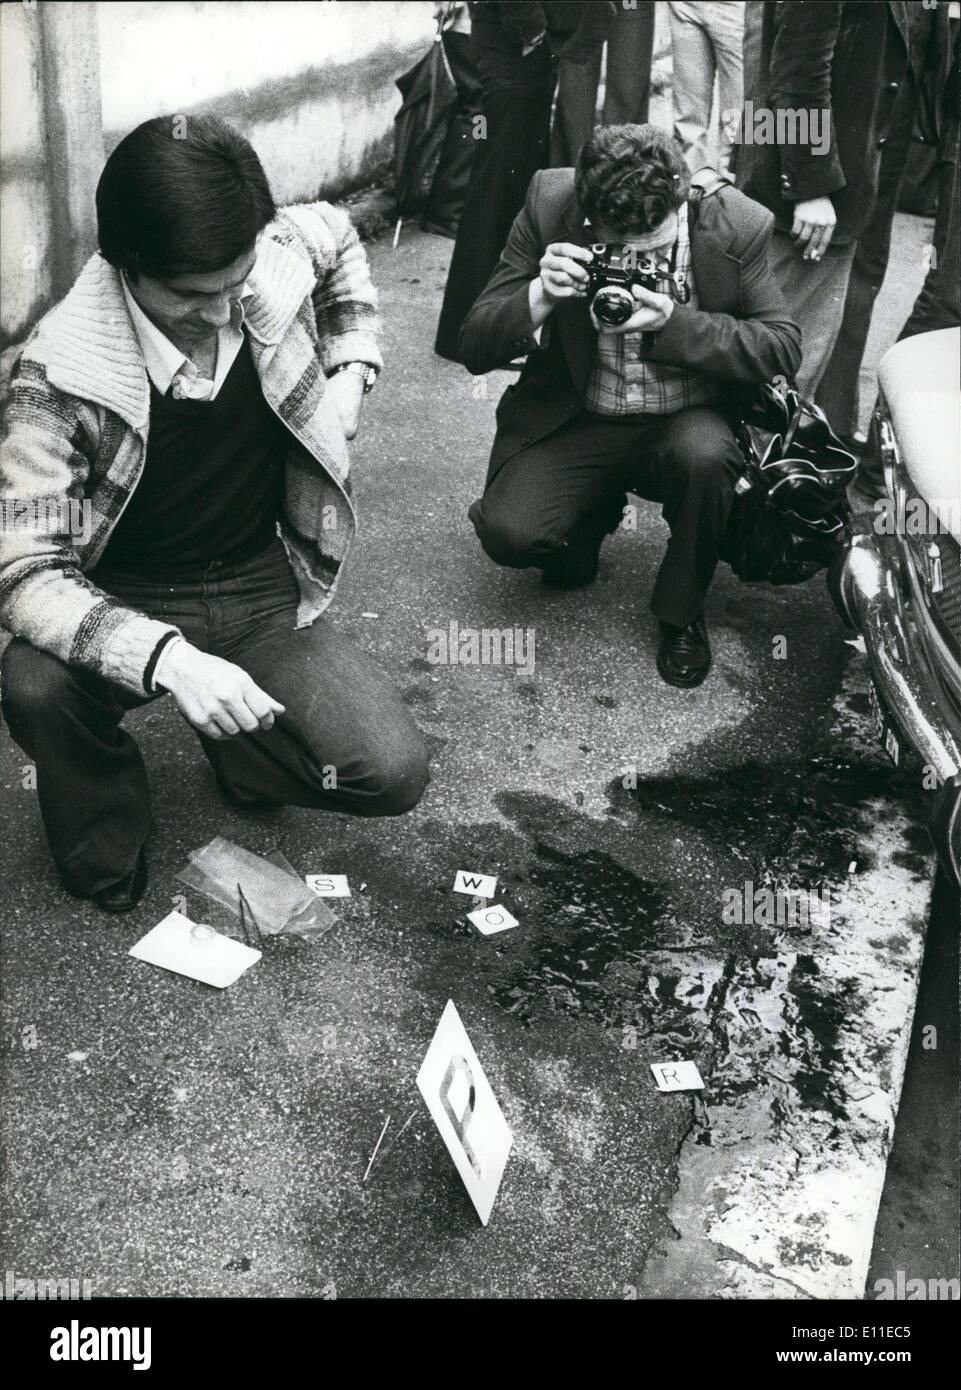 Jun. 06, 1977 - Another attempt to a newsman. This time the newsman Emilio Rossi, director of the Telenews of the System n. I of the Television, was shot by numerous shoots of revolver before he was enter in the Television Studios. Photo shows newsman Emilio Rossi and the place of the attempt. Stock Photo